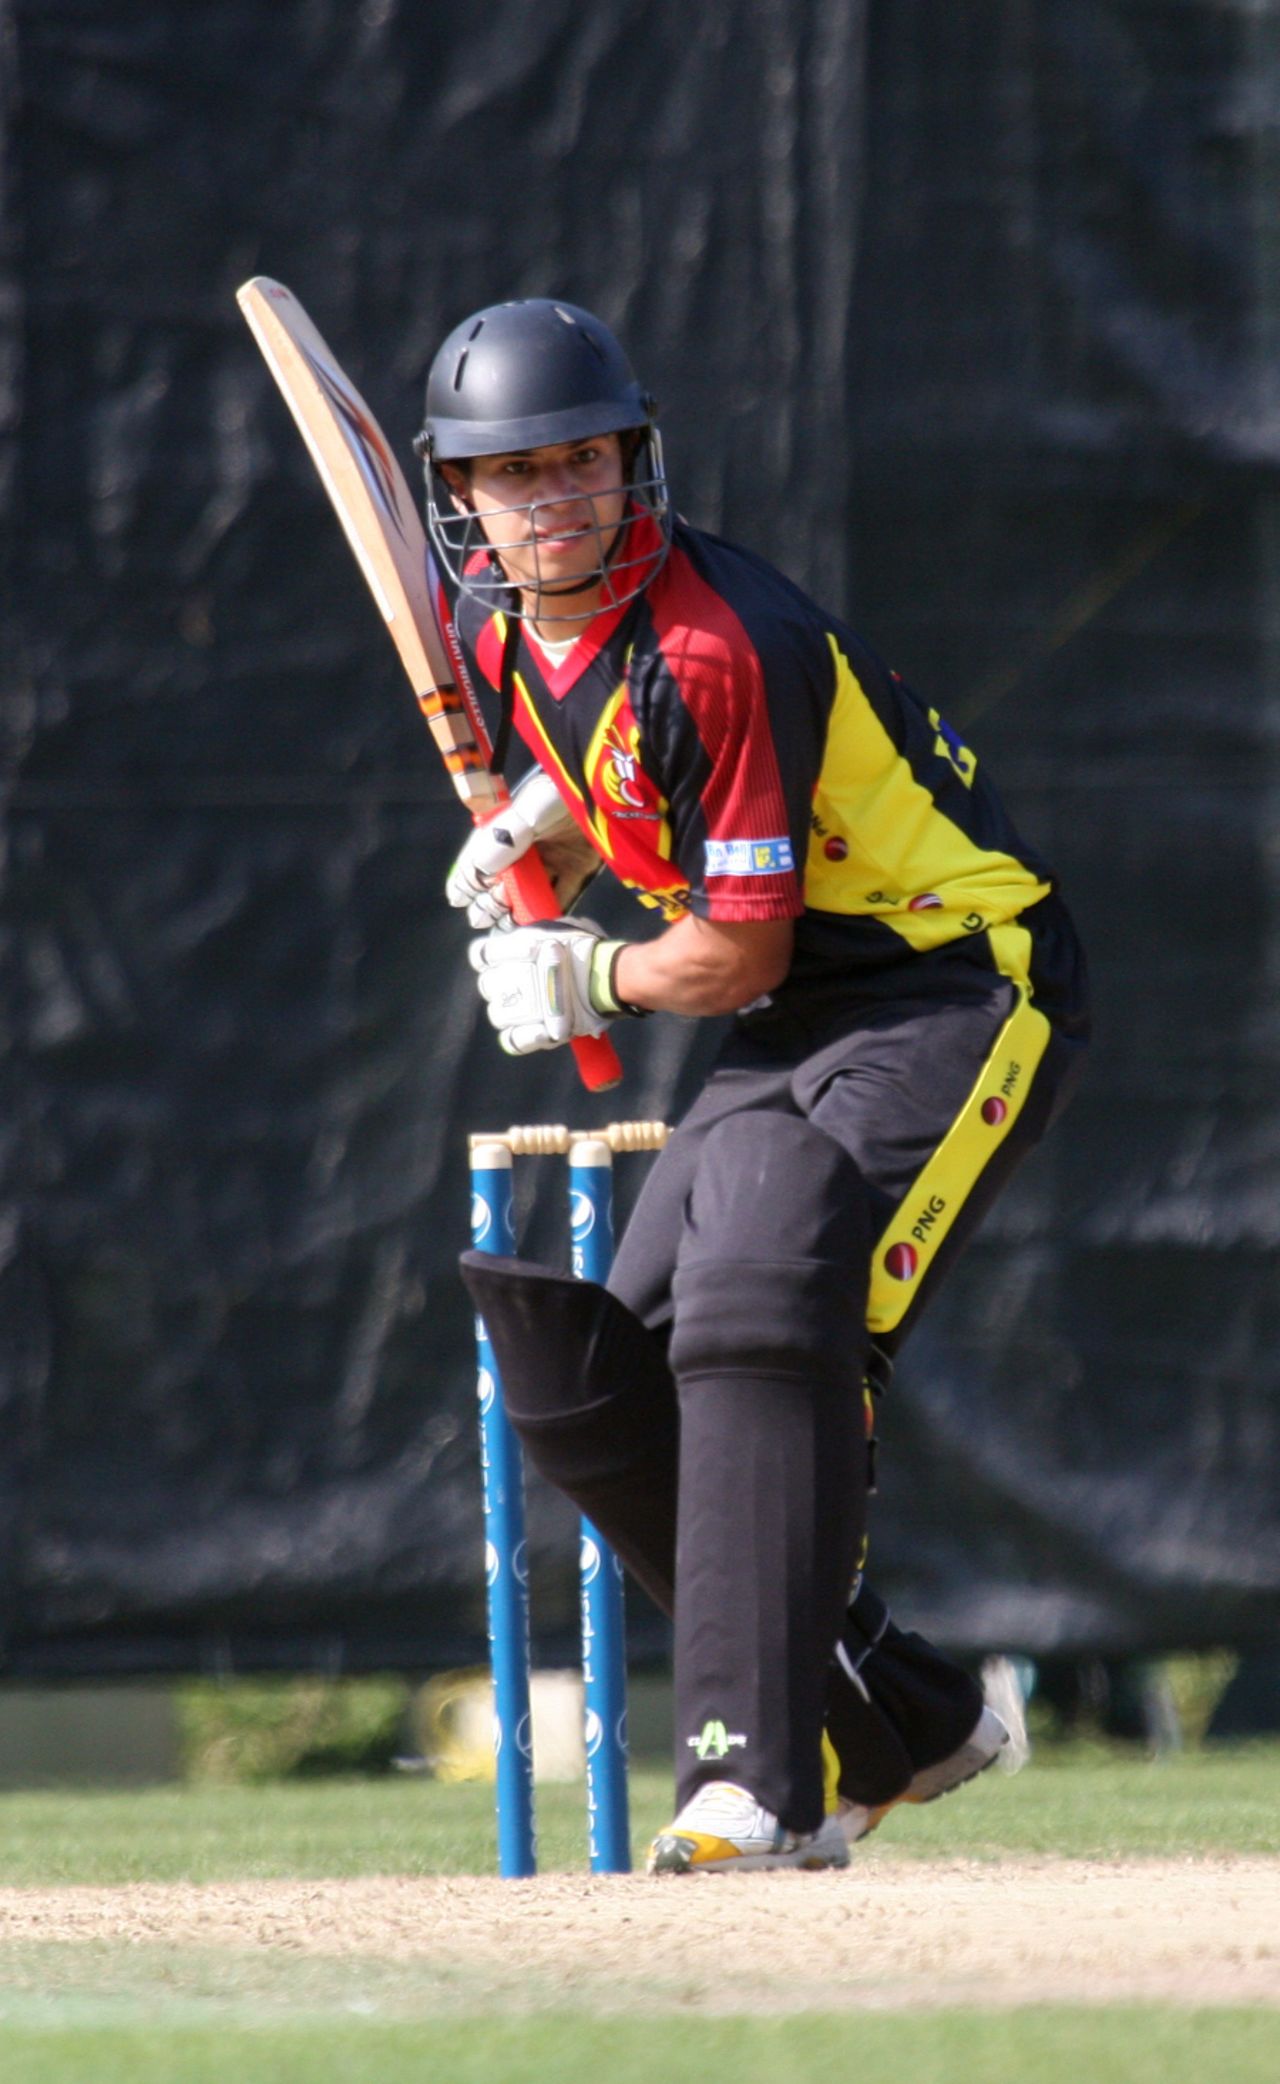 Chris Kent at the crease for Papua New Guinea, Italy v Papua New Guinea, WCL Division 3, Wong Nai, January 23, 2011